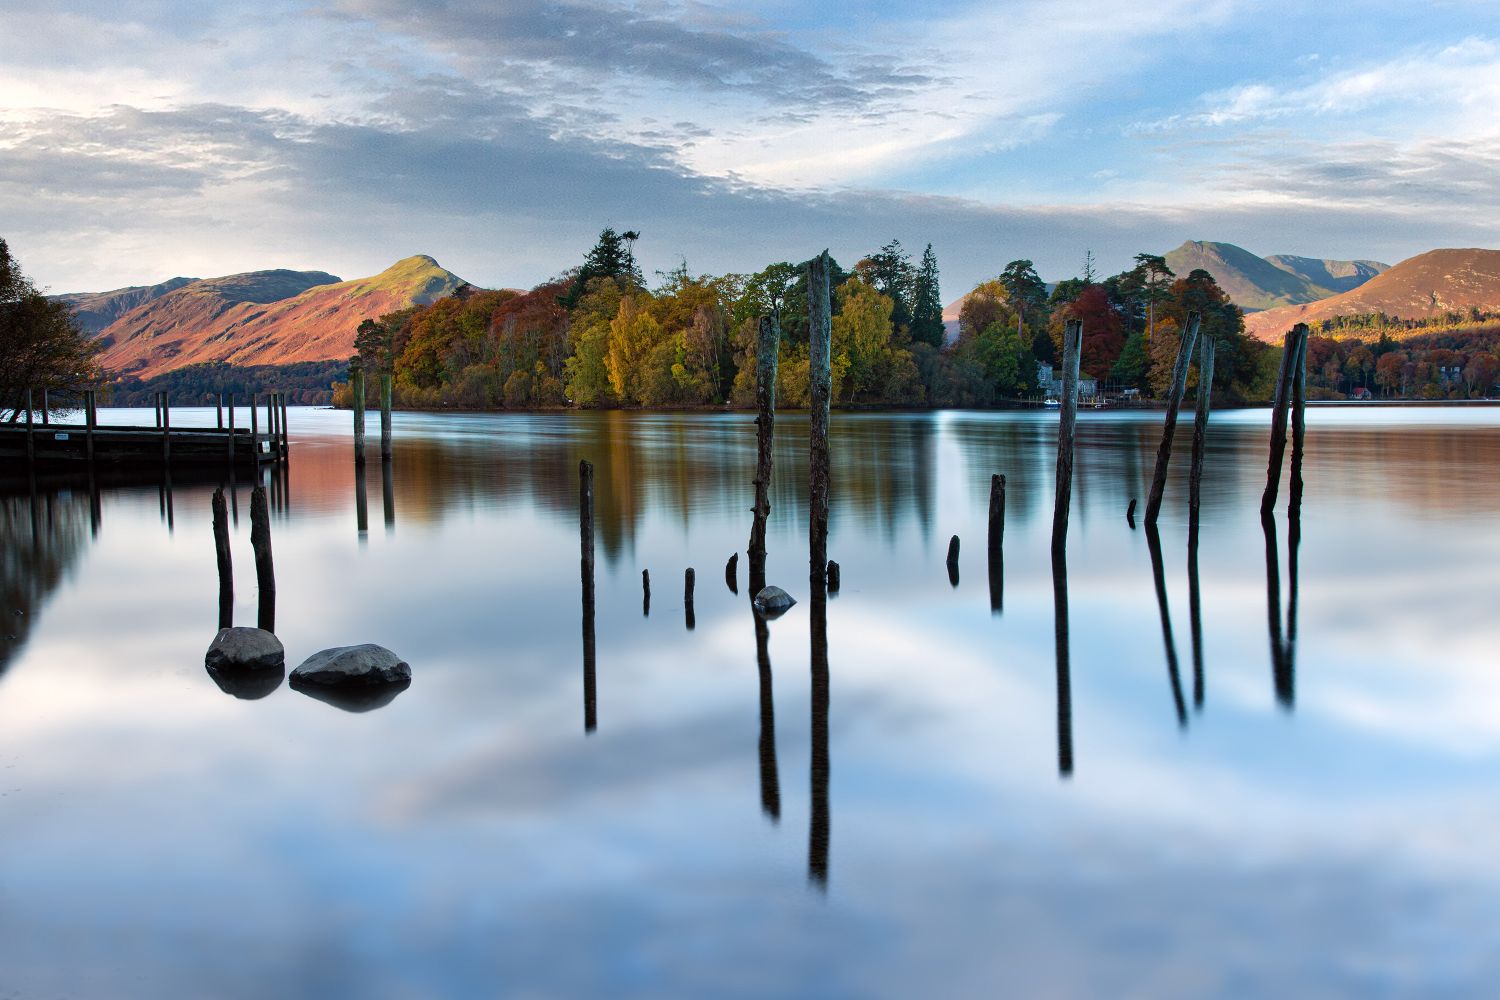 A Morning to Remember at Derwentwater by Martin Lawrence